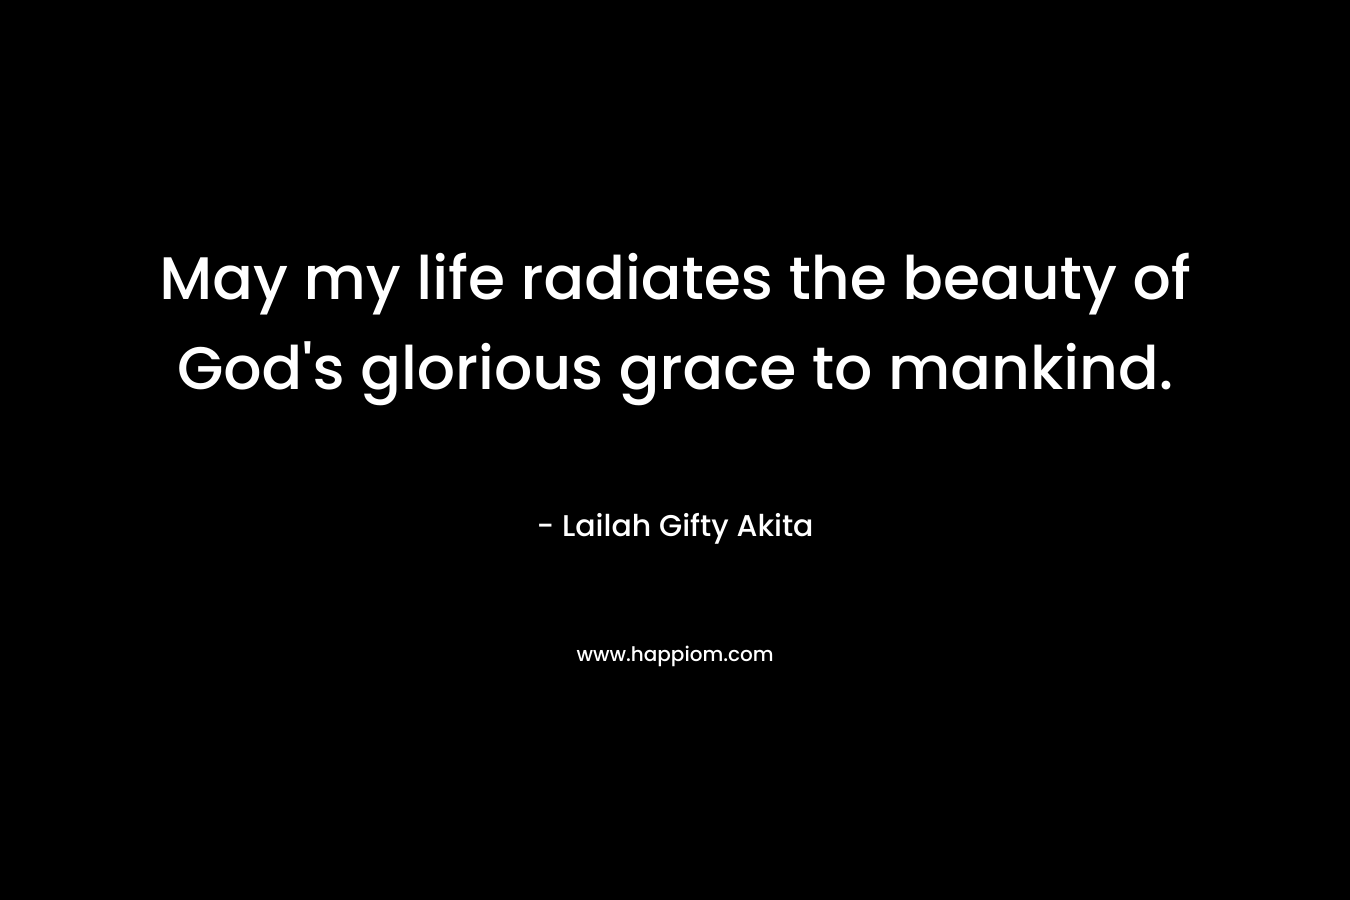 May my life radiates the beauty of God’s glorious grace to mankind. – Lailah Gifty Akita